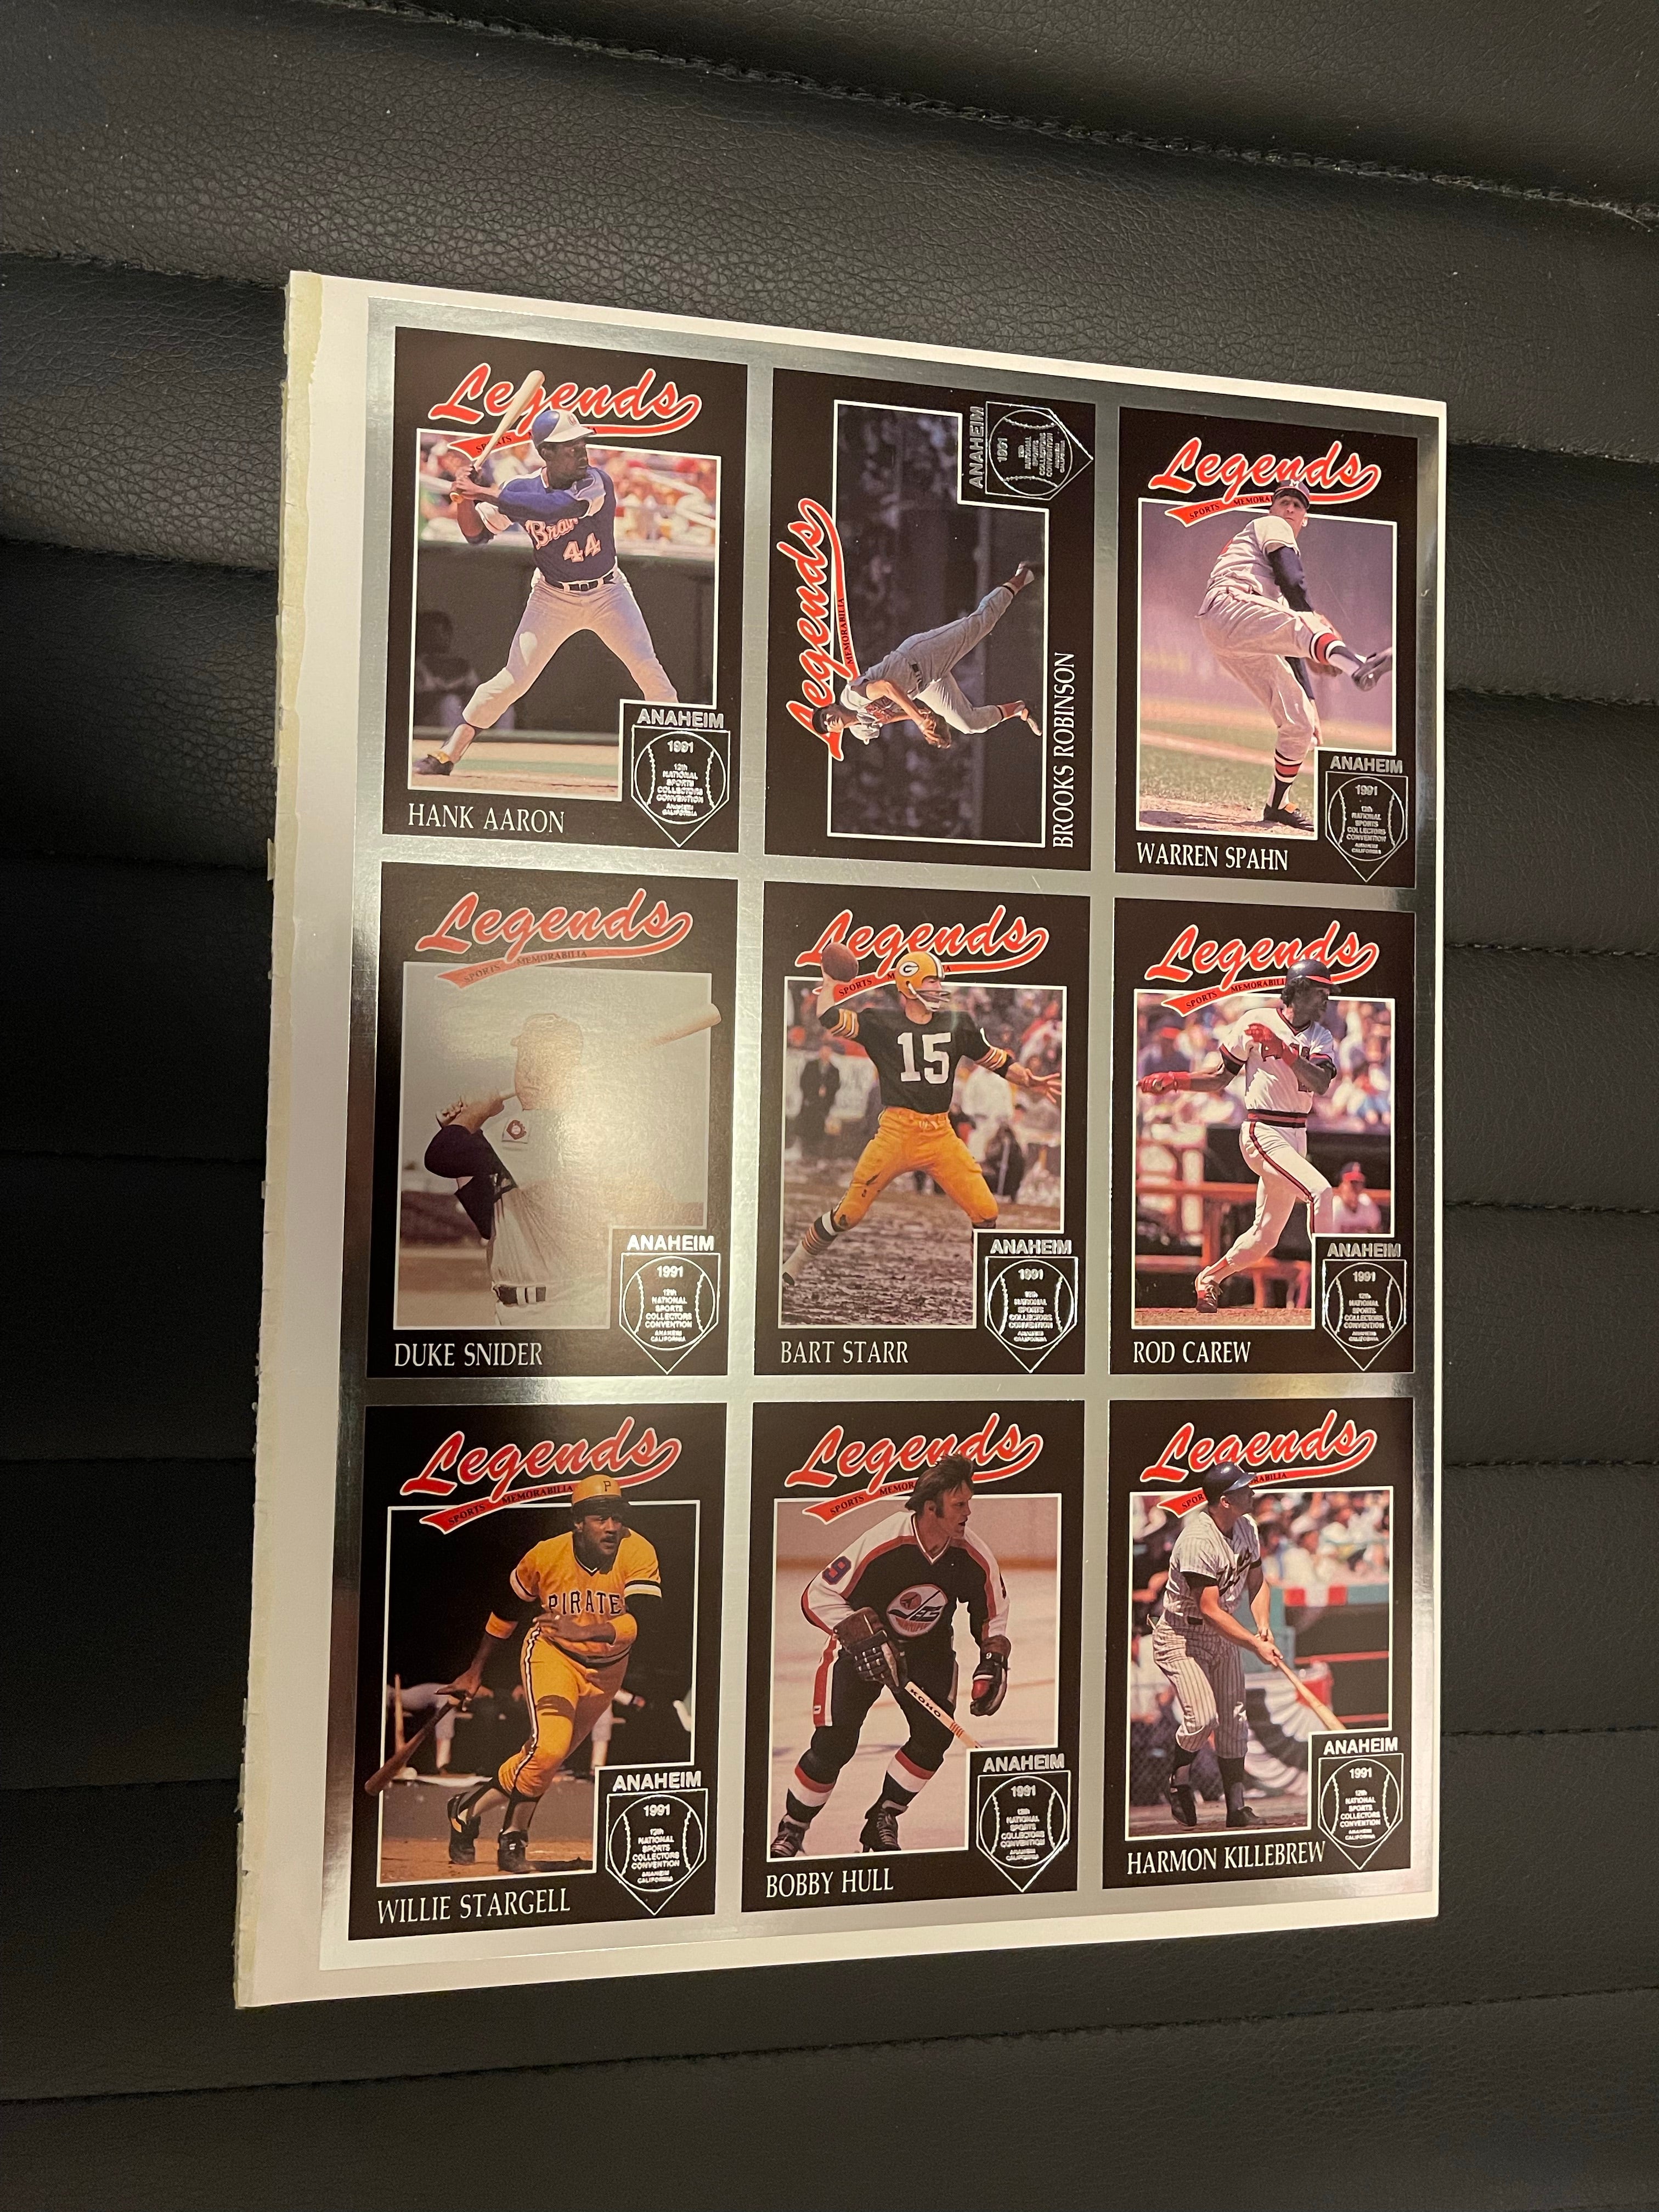 Legends sports 9 cards uncut sheet with Hank Aaron , Bobby Hull and more 1990s